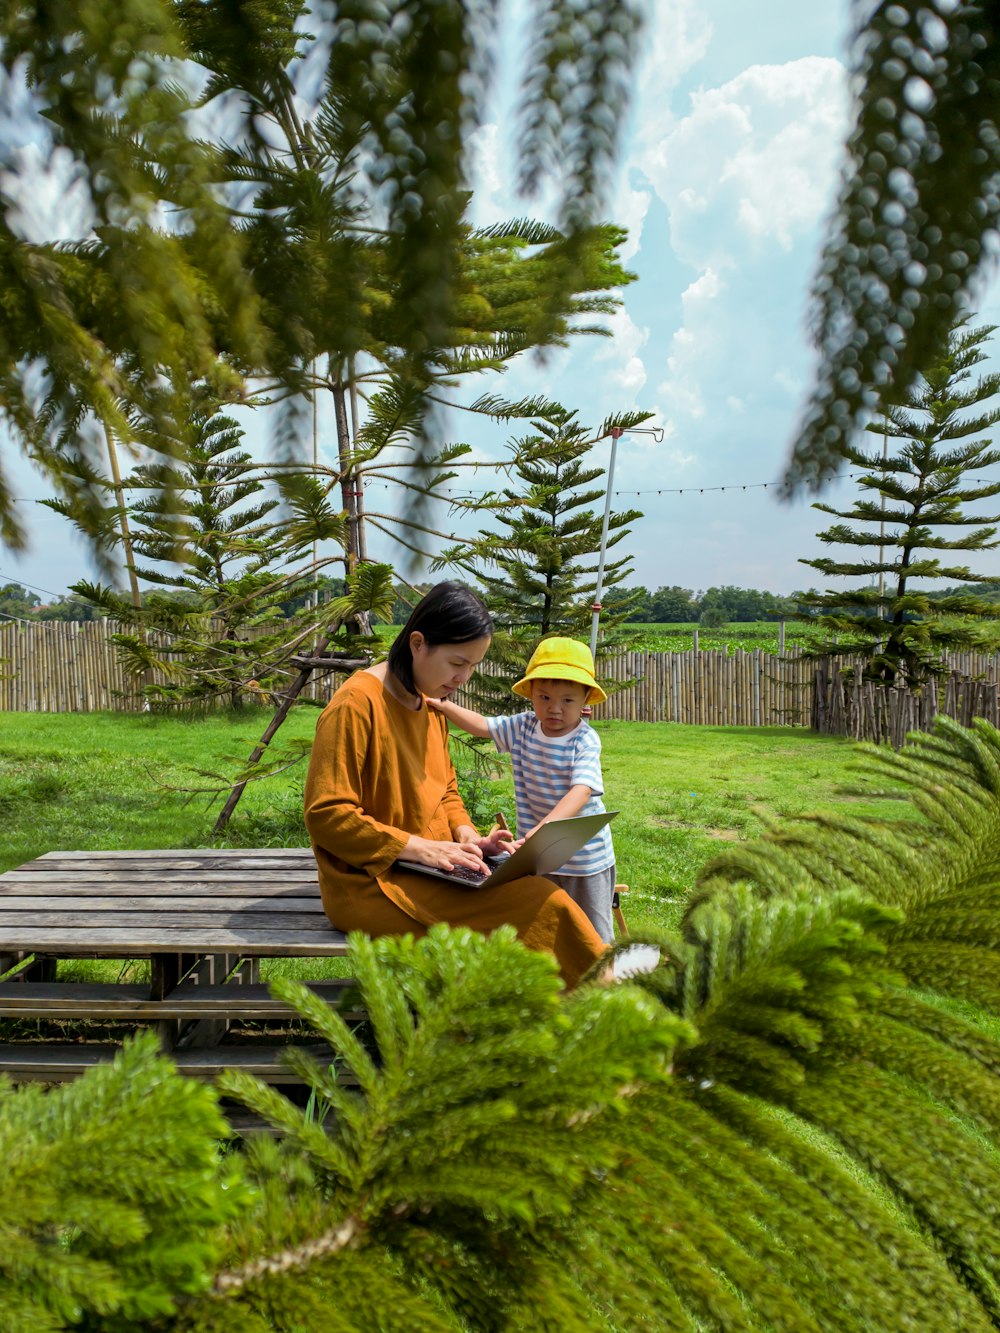 a man and a child sitting on a bench in a garden